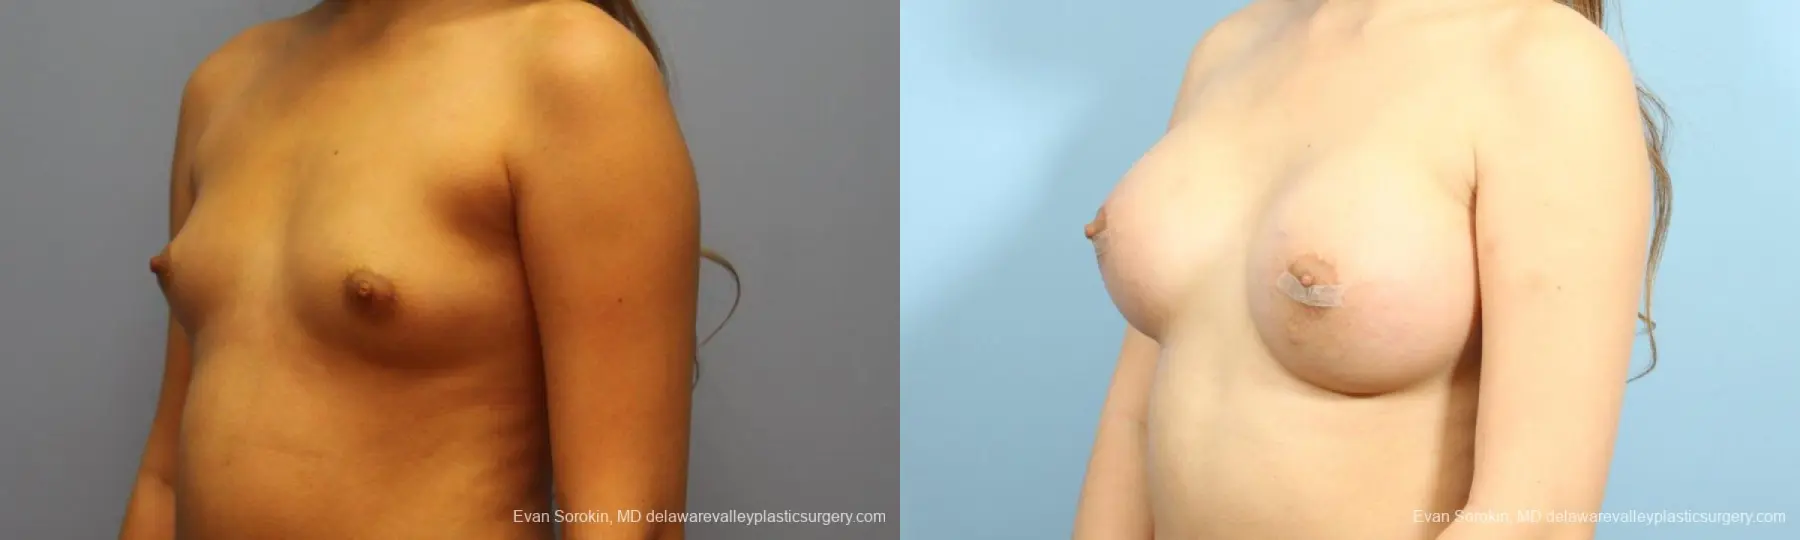 Philadelphia Breast Augmentation 9194 - Before and After 4